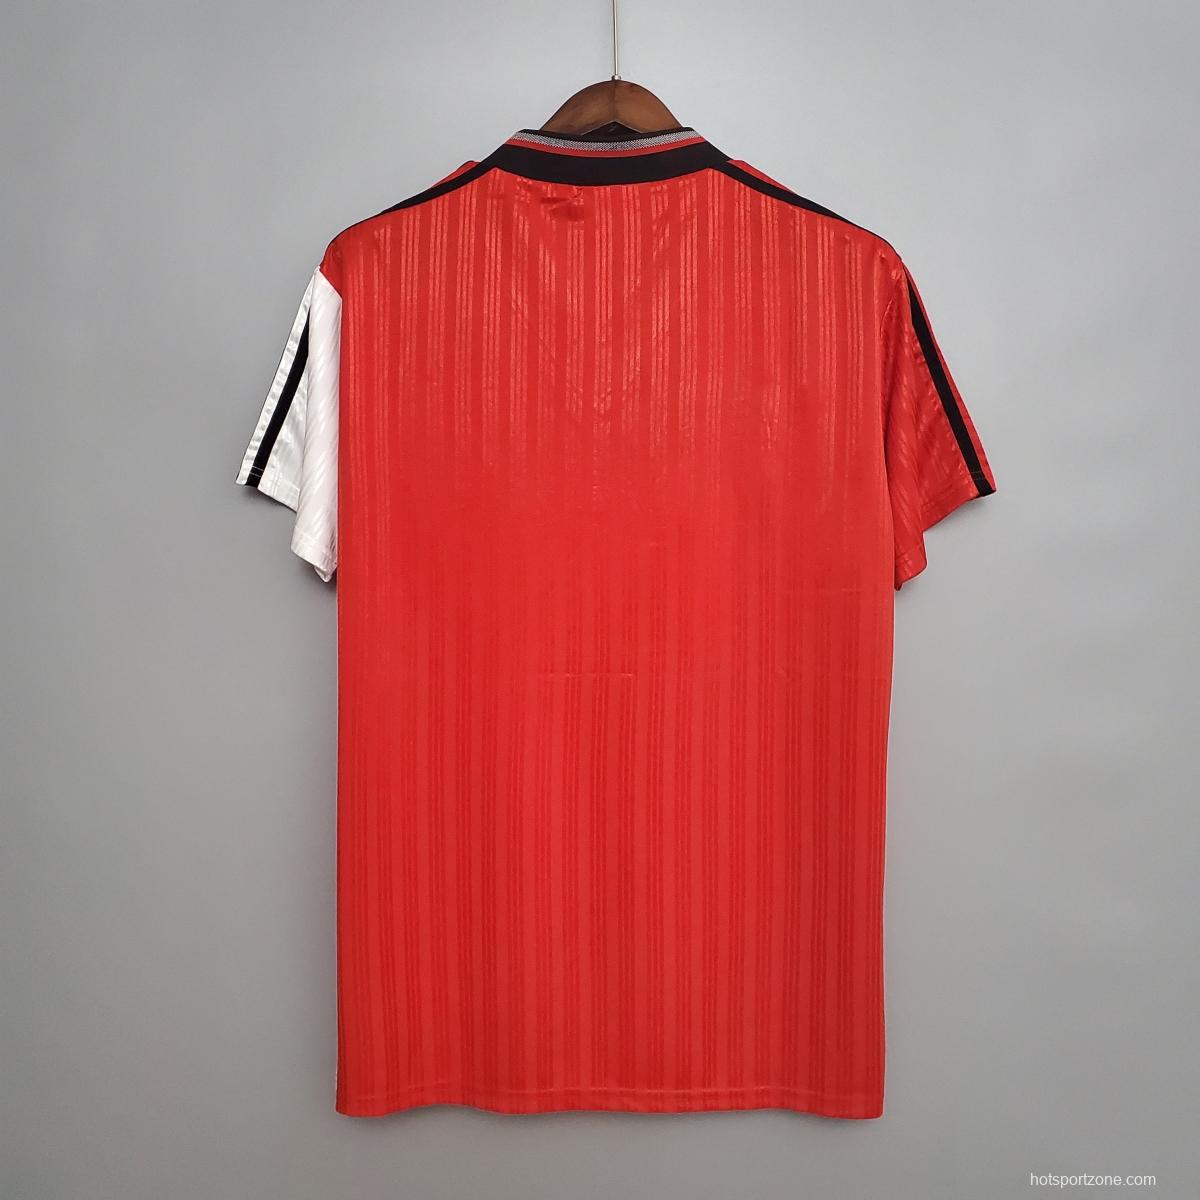 Retro 95/96 Rangers Red and White Soccer Jersey